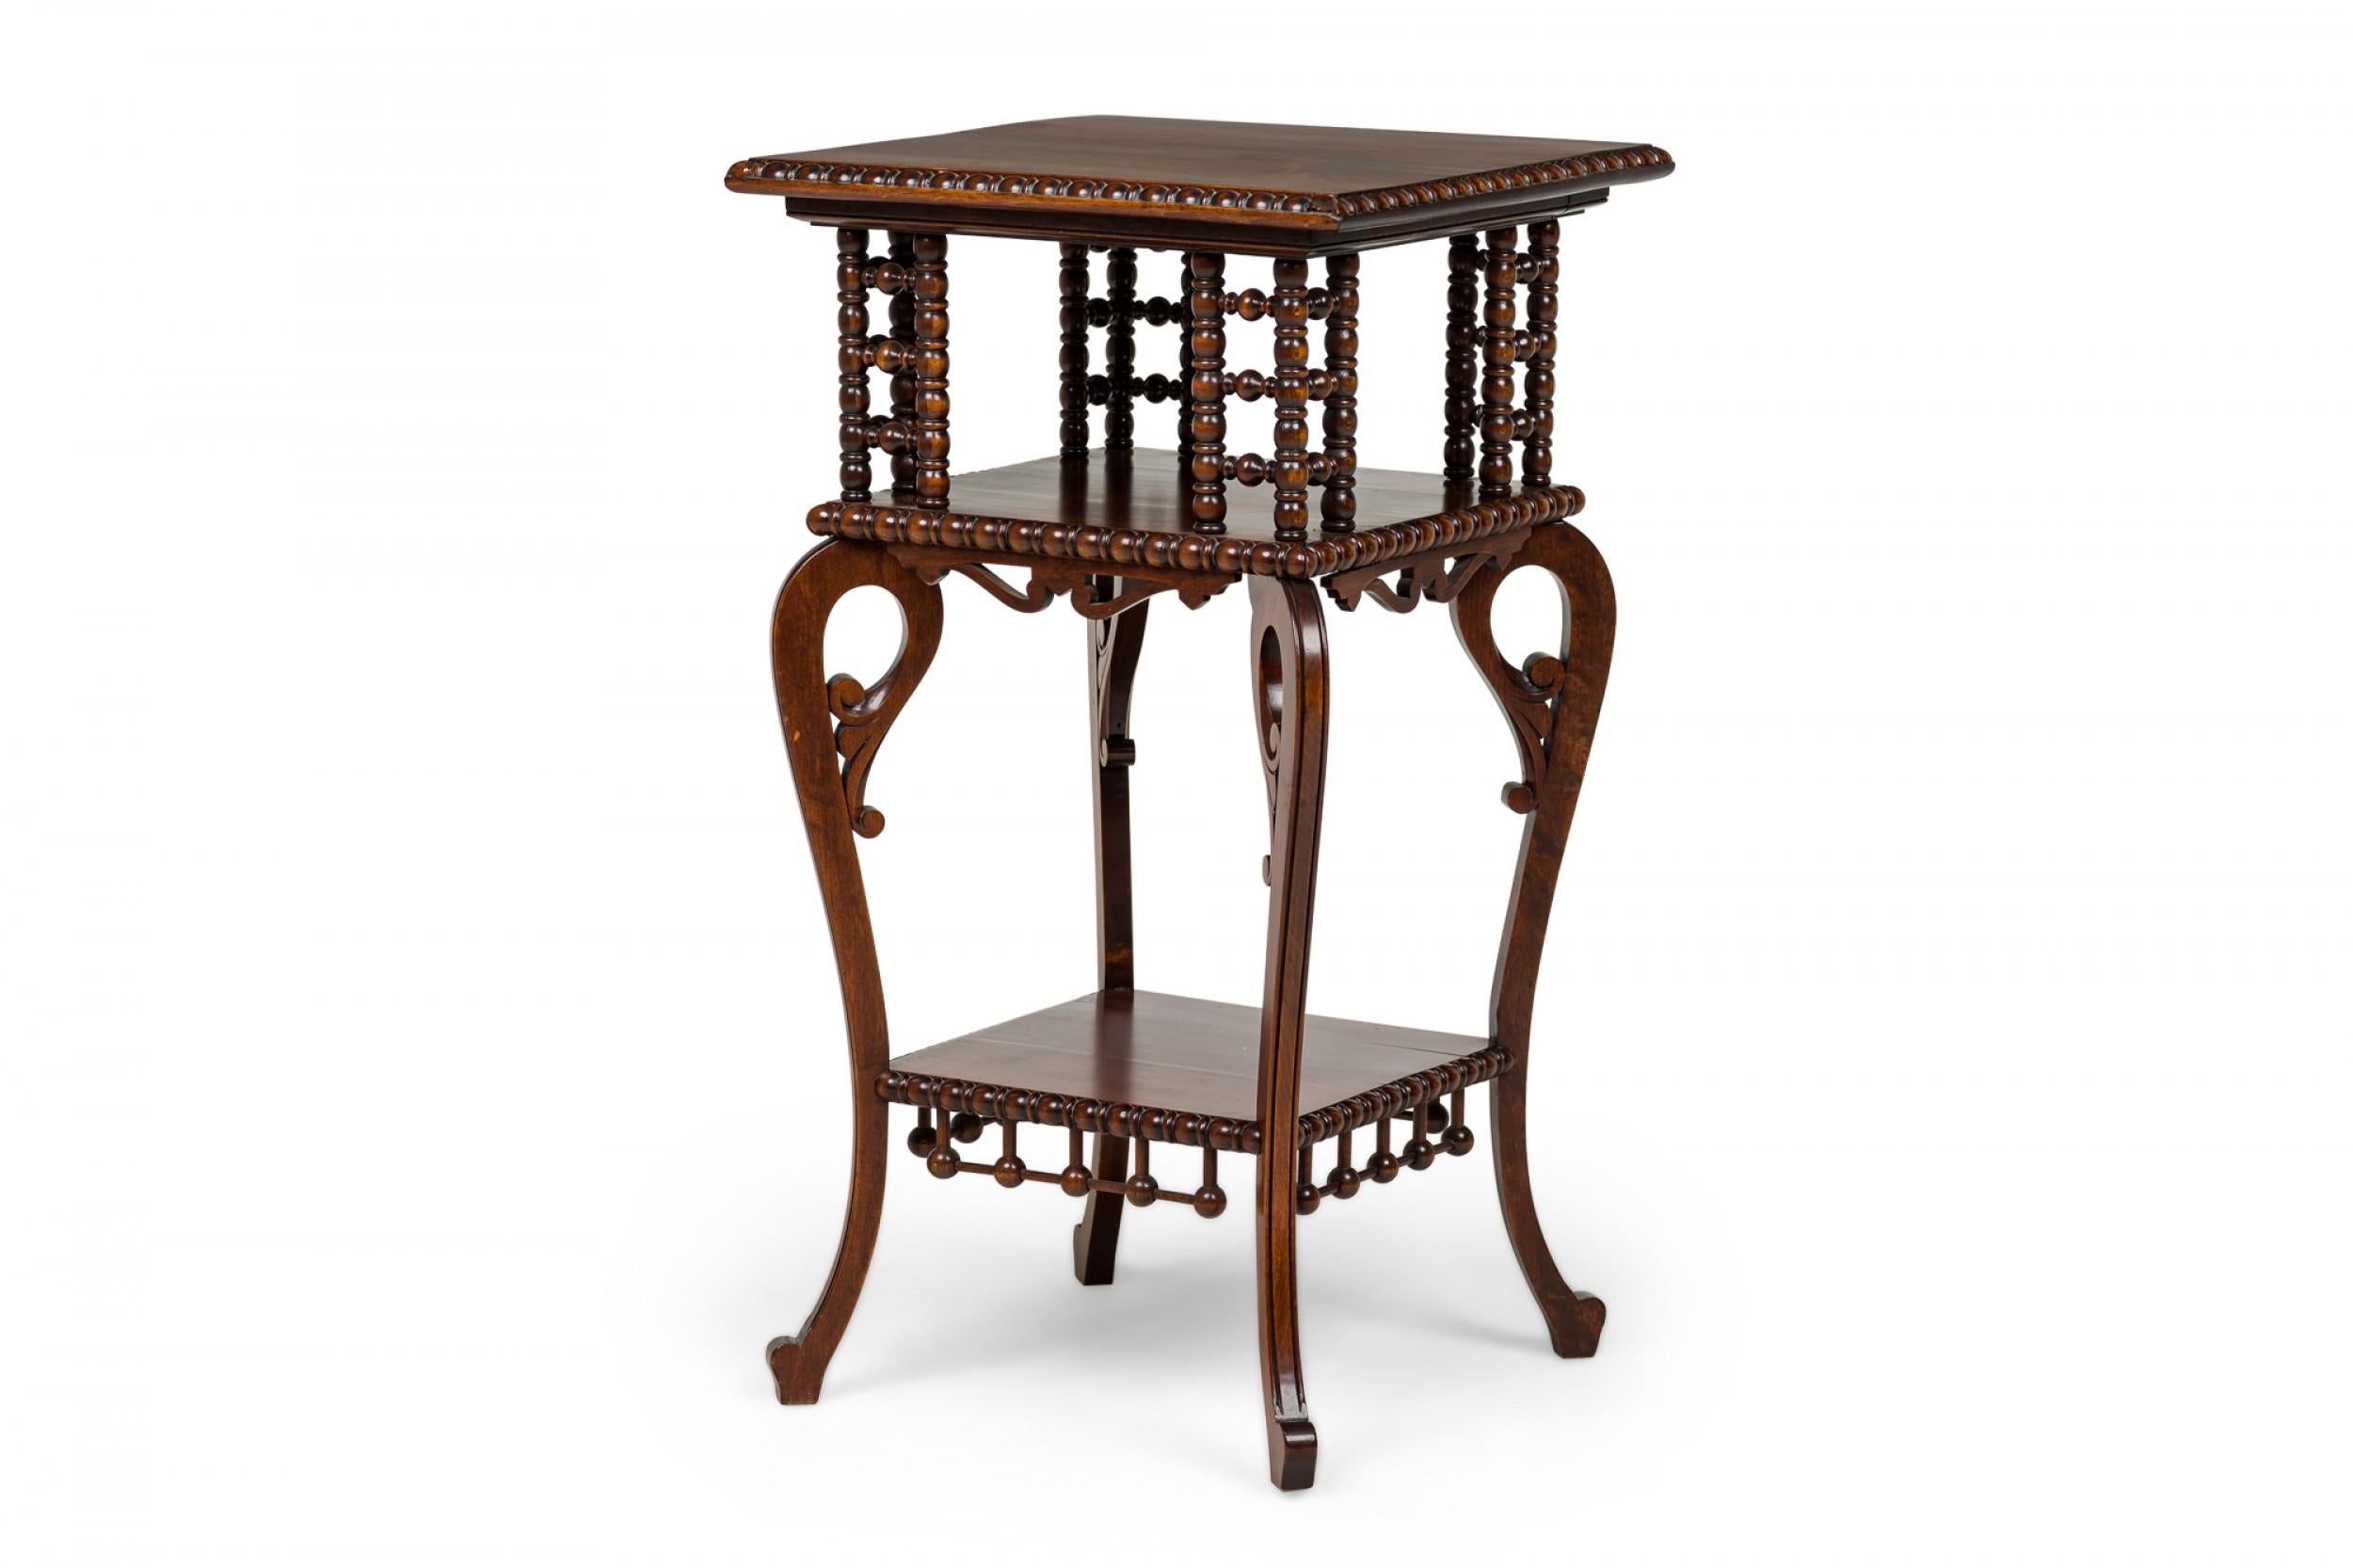 American Victorian mahogany square side table with 2 stretcher shelves, splayed scroll legs, turned ball supports and decorative ornamentation.